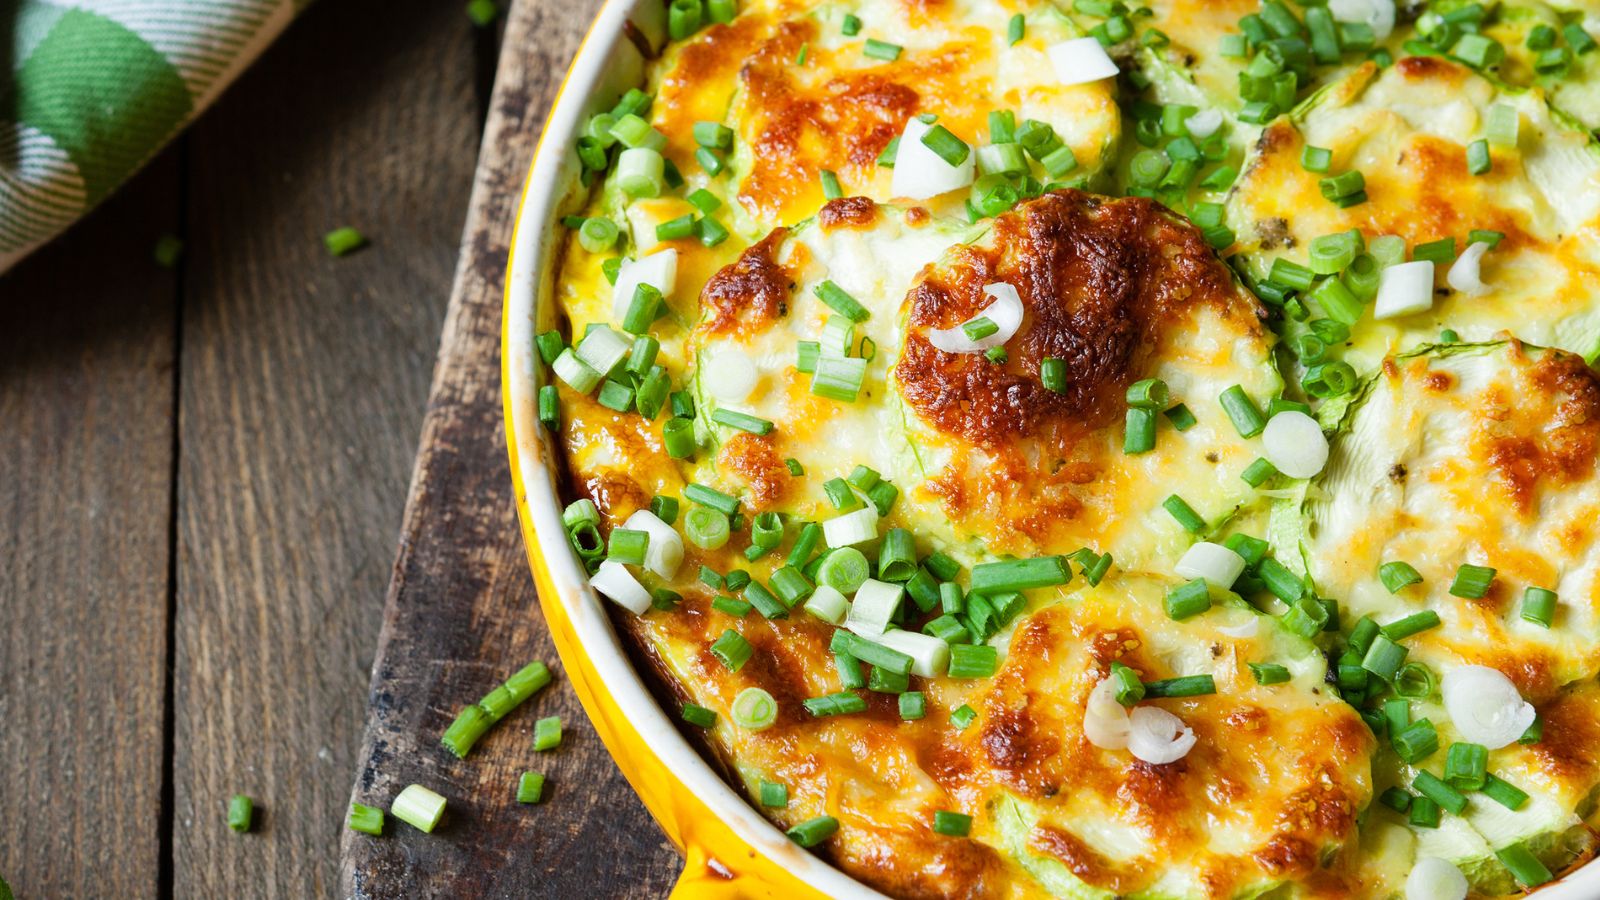 Discover 20 Cauliflower Recipes That’ll Have You Bidding Farewell to Potatoes